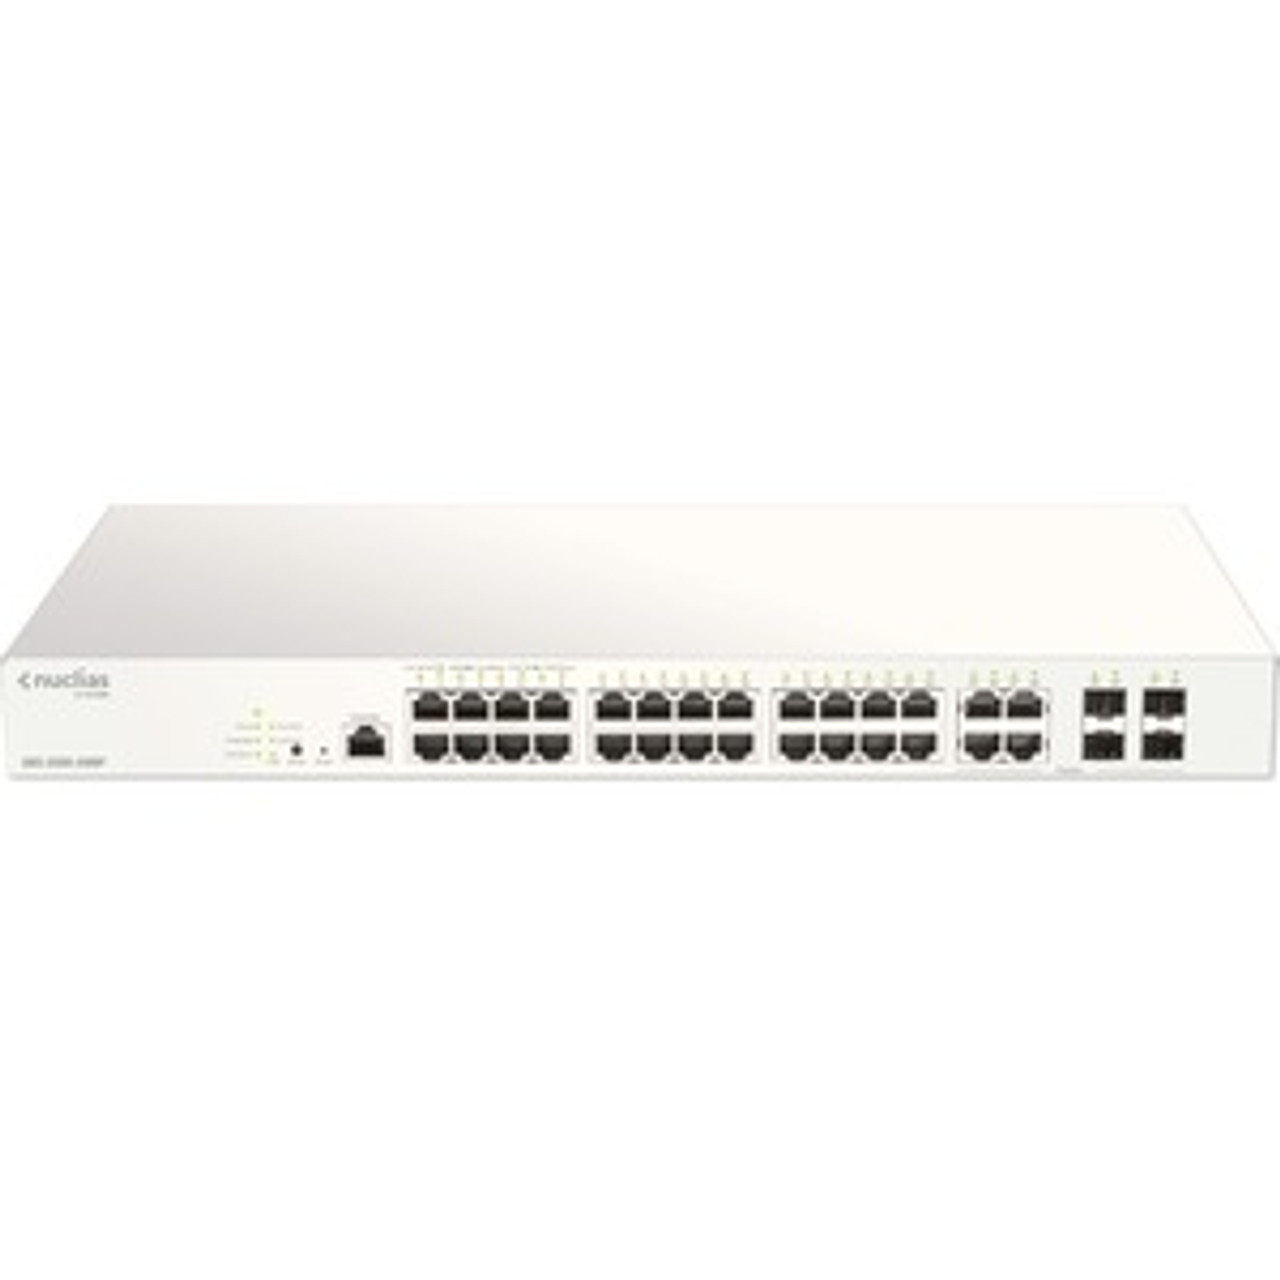 DBS-2000-28MP D-Link 28-Port Nuclias Cloud-Managed PoE Switch - 28 Ports - Manageable - 2 Layer Supported - Modular - 4 SFP Slots - Optical Fiber, Twisted 